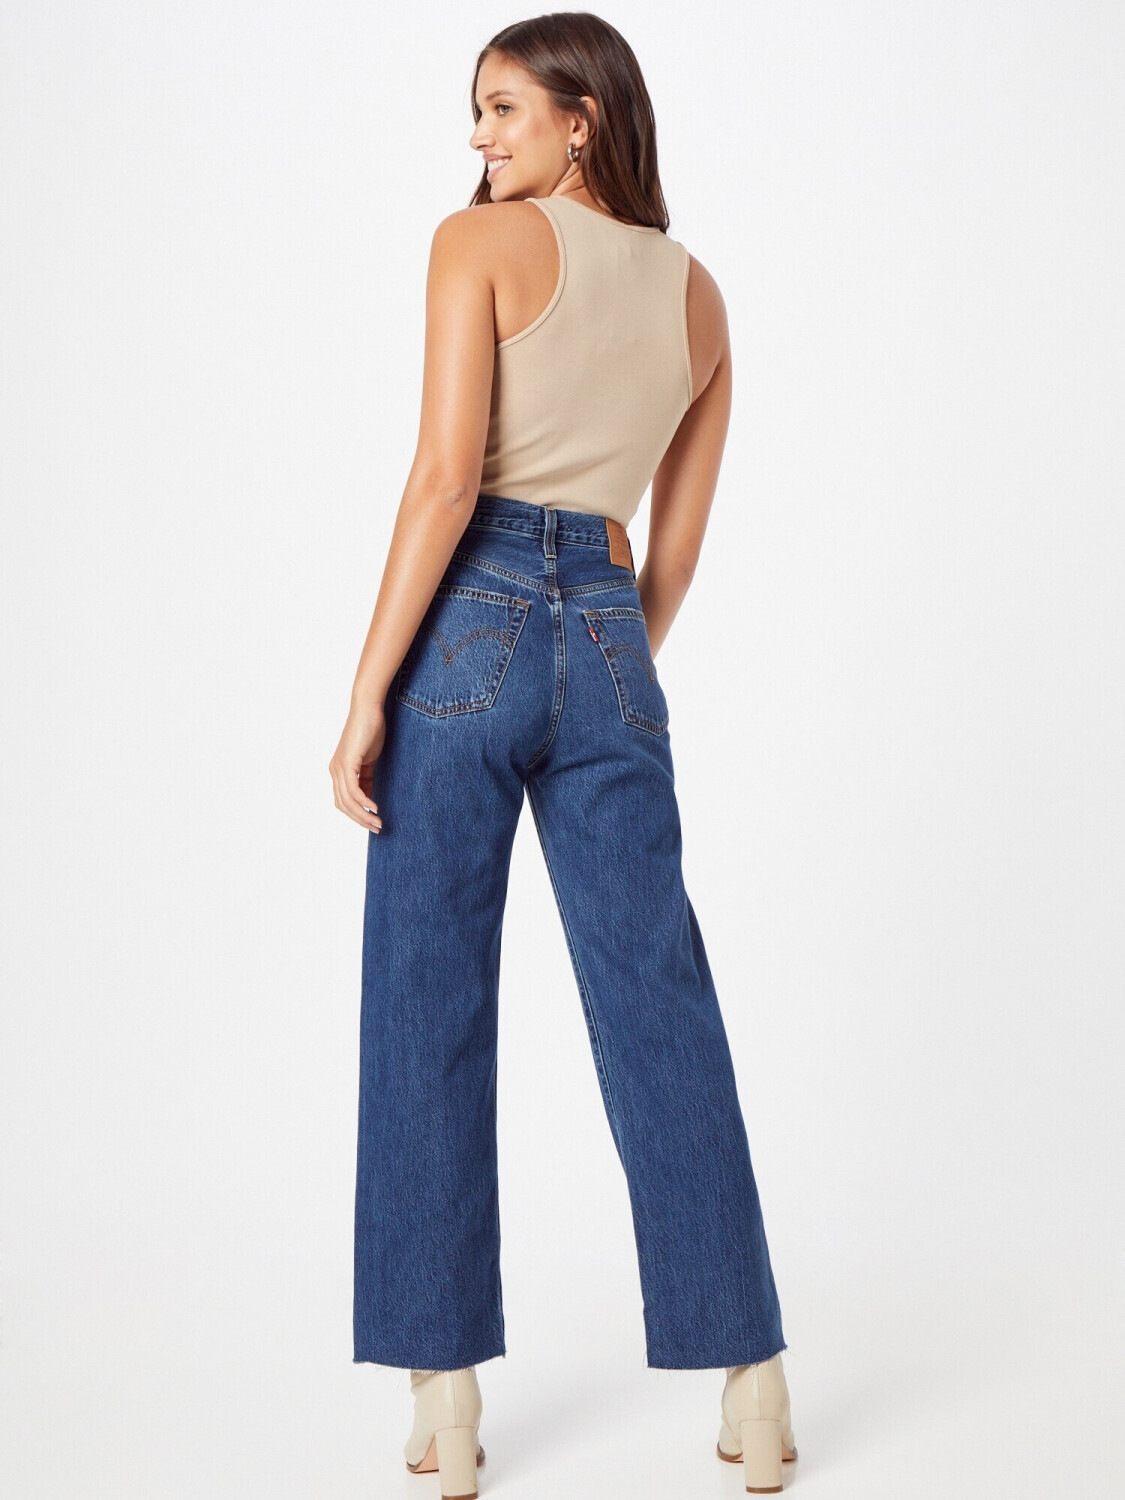 Levi's Ribcage Straight Ankle Jeans Noe Down a € 69,99 (oggi ...